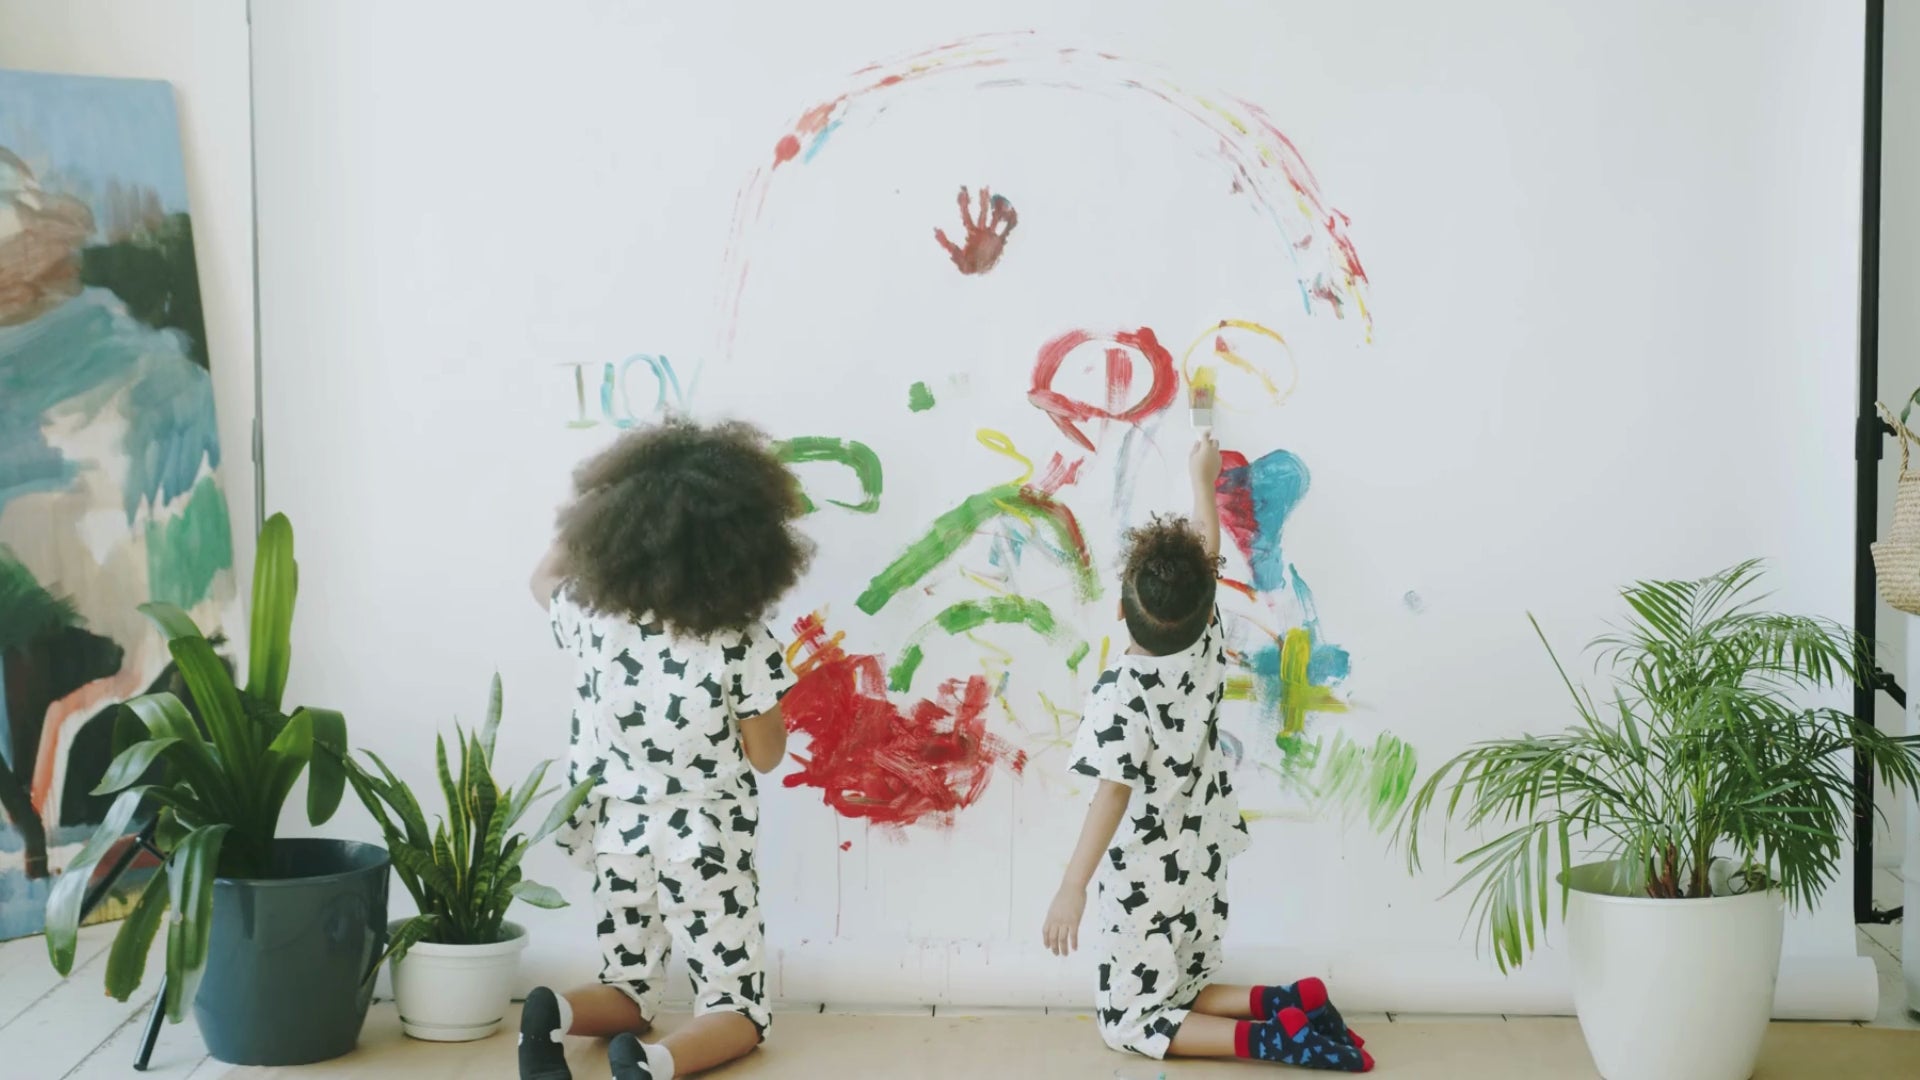 Load video: Children painting on wall